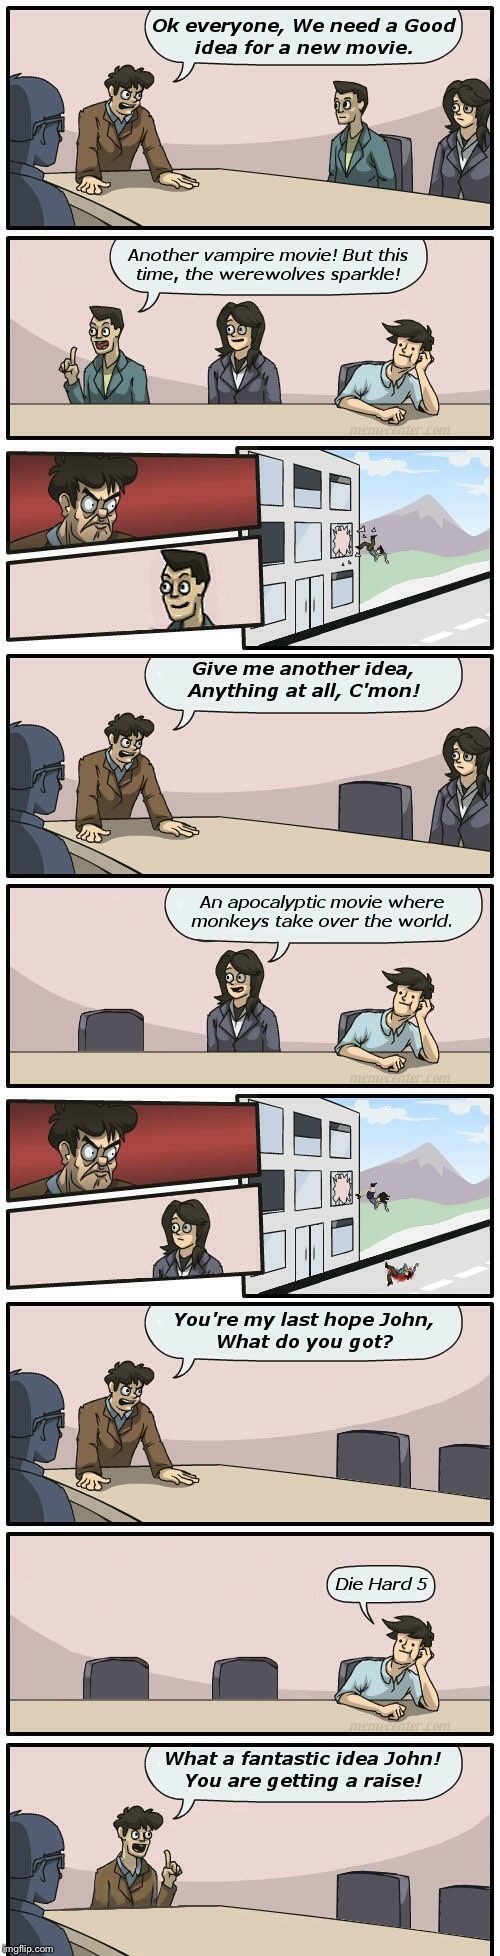 Movie meeting suggestion | image tagged in boardroom meeting suggestion | made w/ Imgflip meme maker